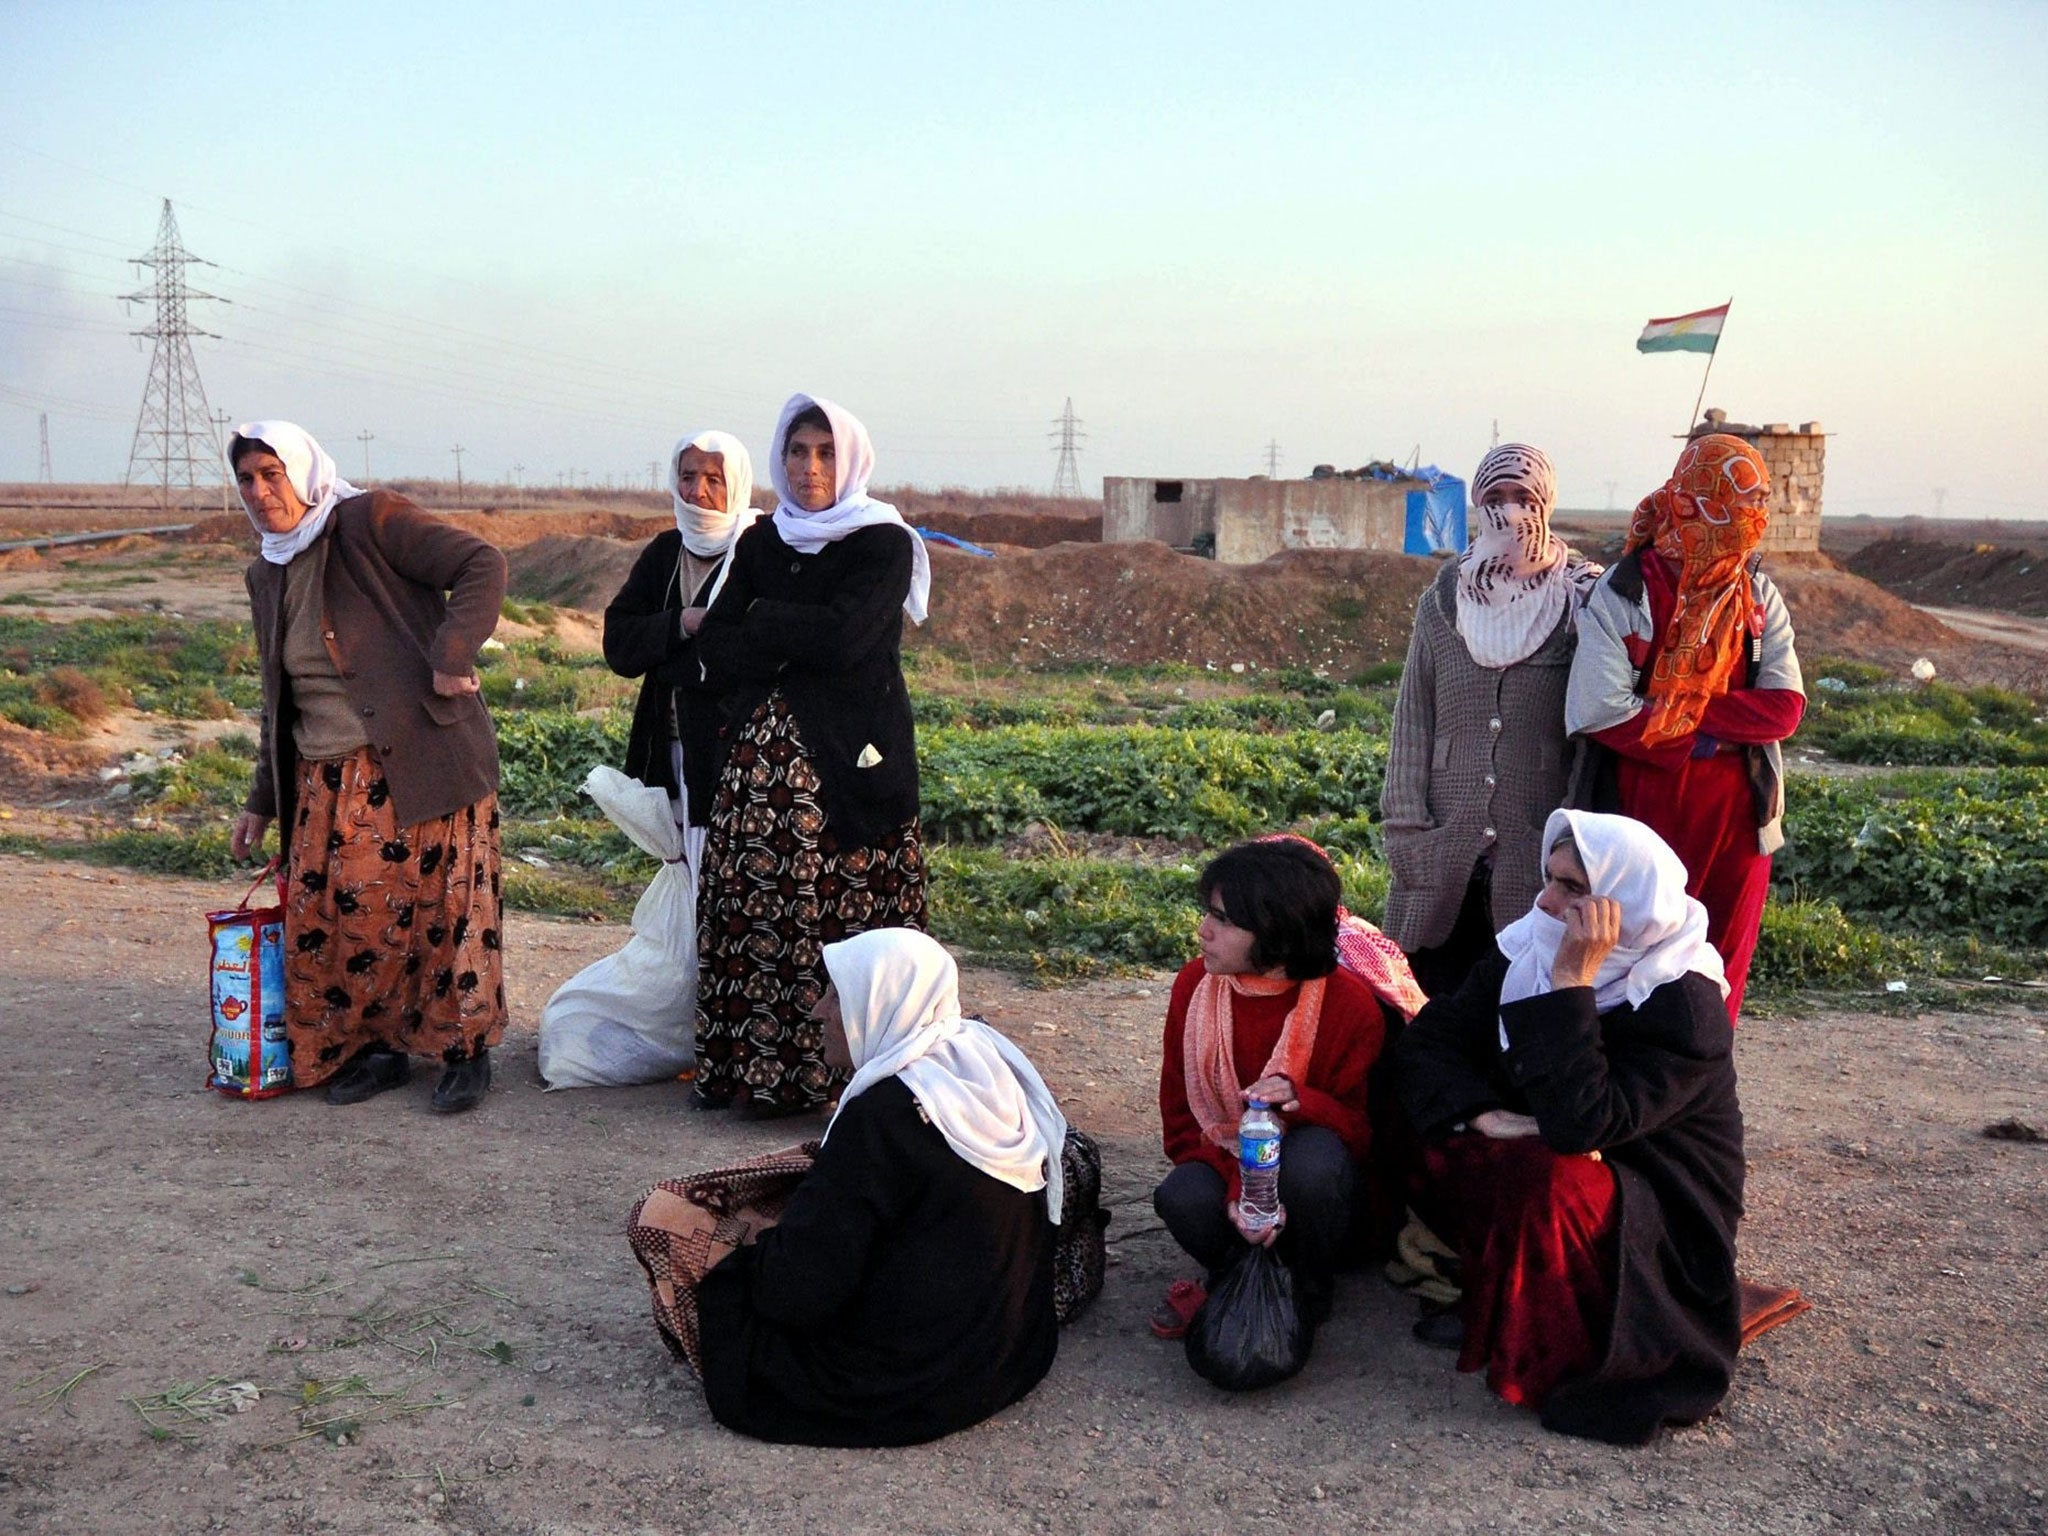 Iraqi Yazidi women waiting at a checkpoint in Kirkuk after their release by the Isis militant group